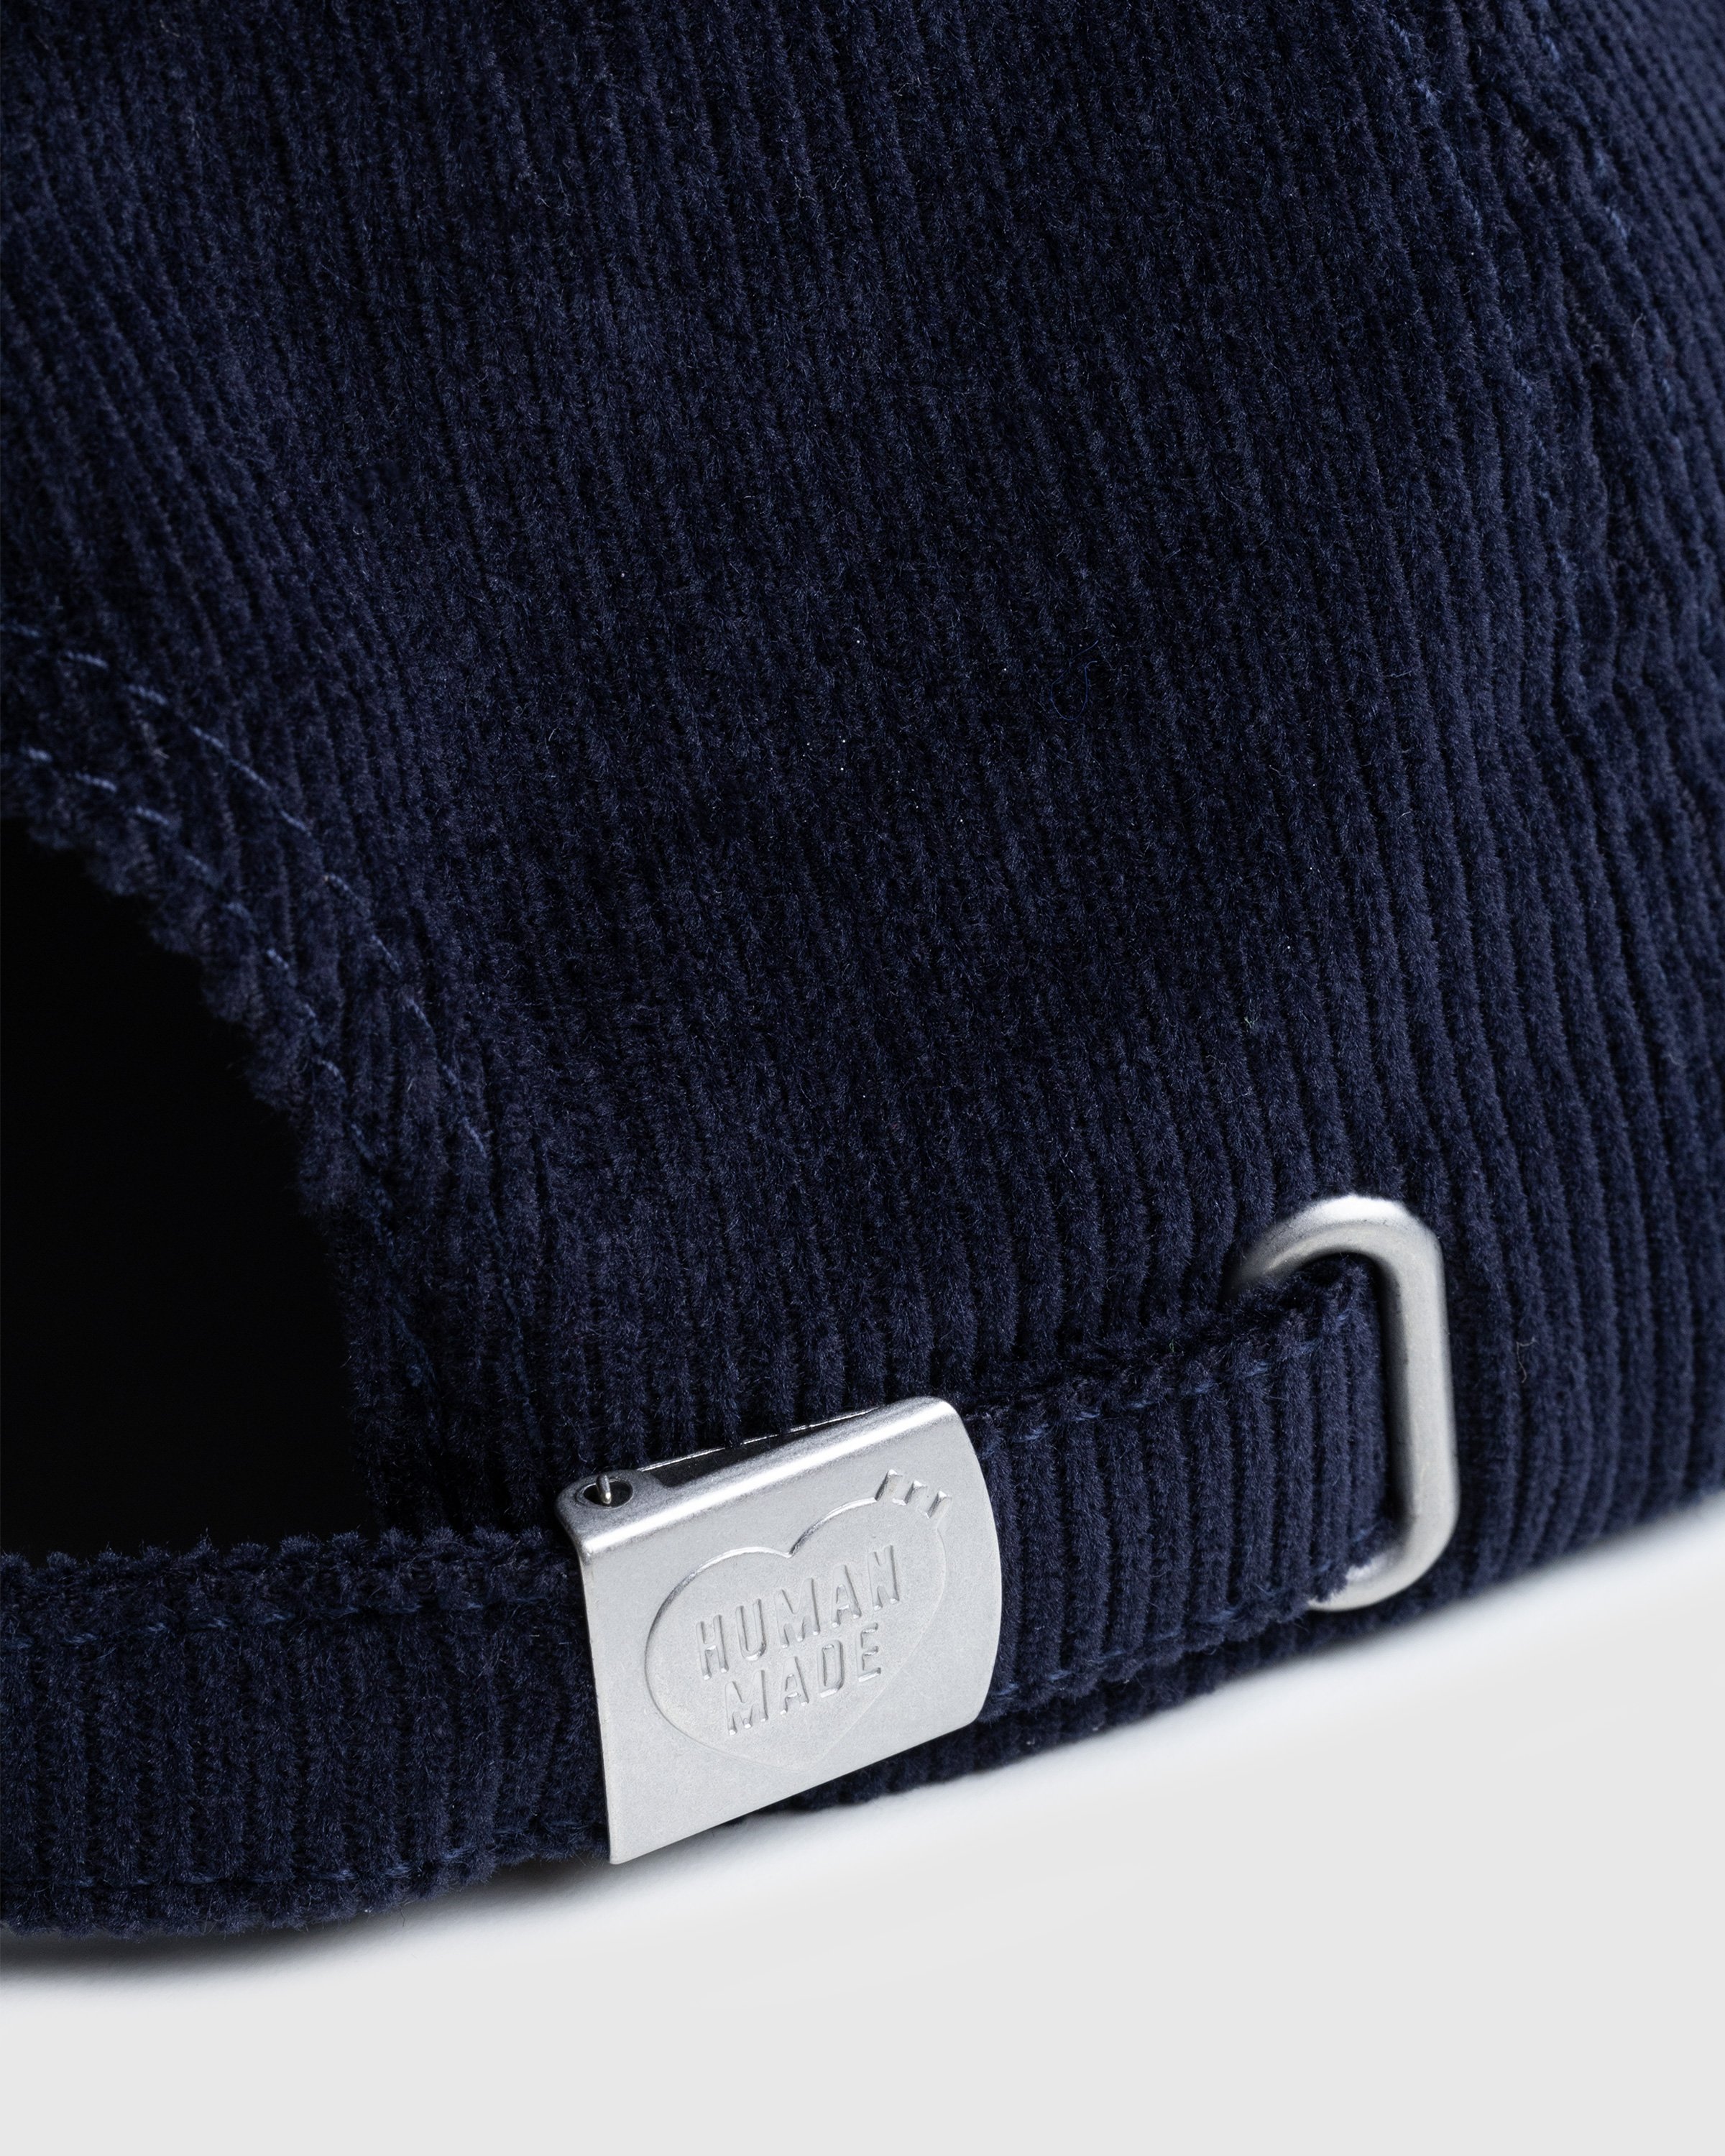 Human Made - 6-Panel Corduroy Cap Navy - Accessories - Blue - Image 7